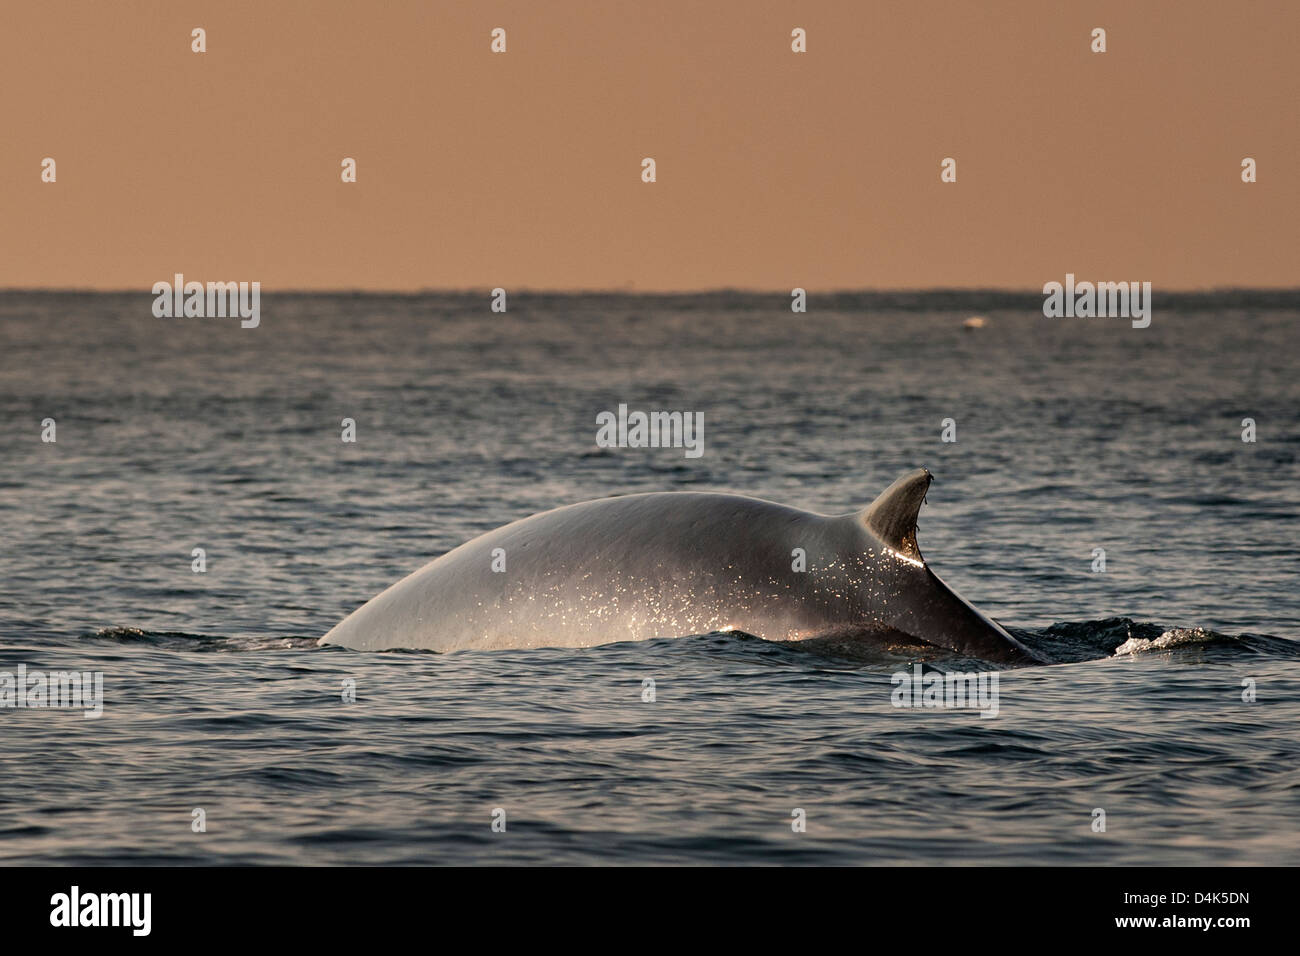 Fin whale emerging from water Stock Photo